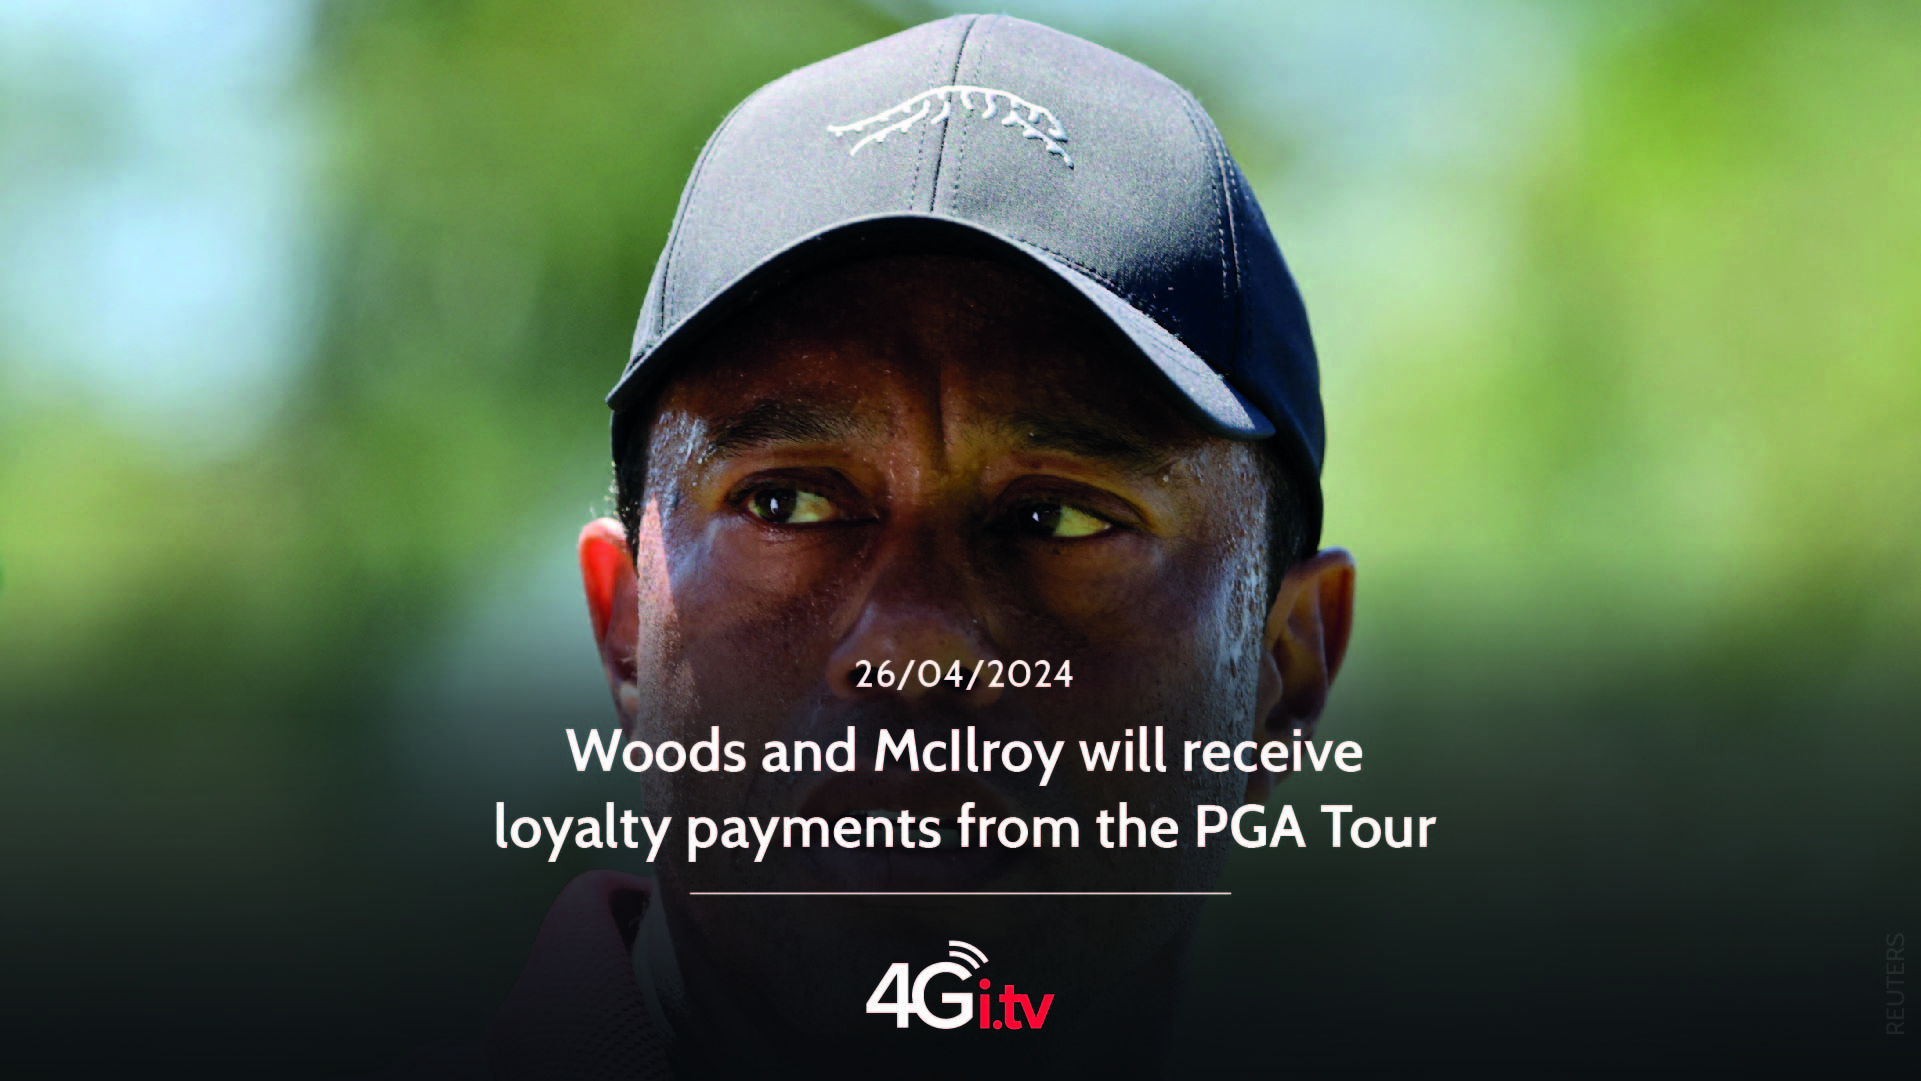 Подробнее о статье Woods and McIlroy will receive loyalty payments from the PGA Tour